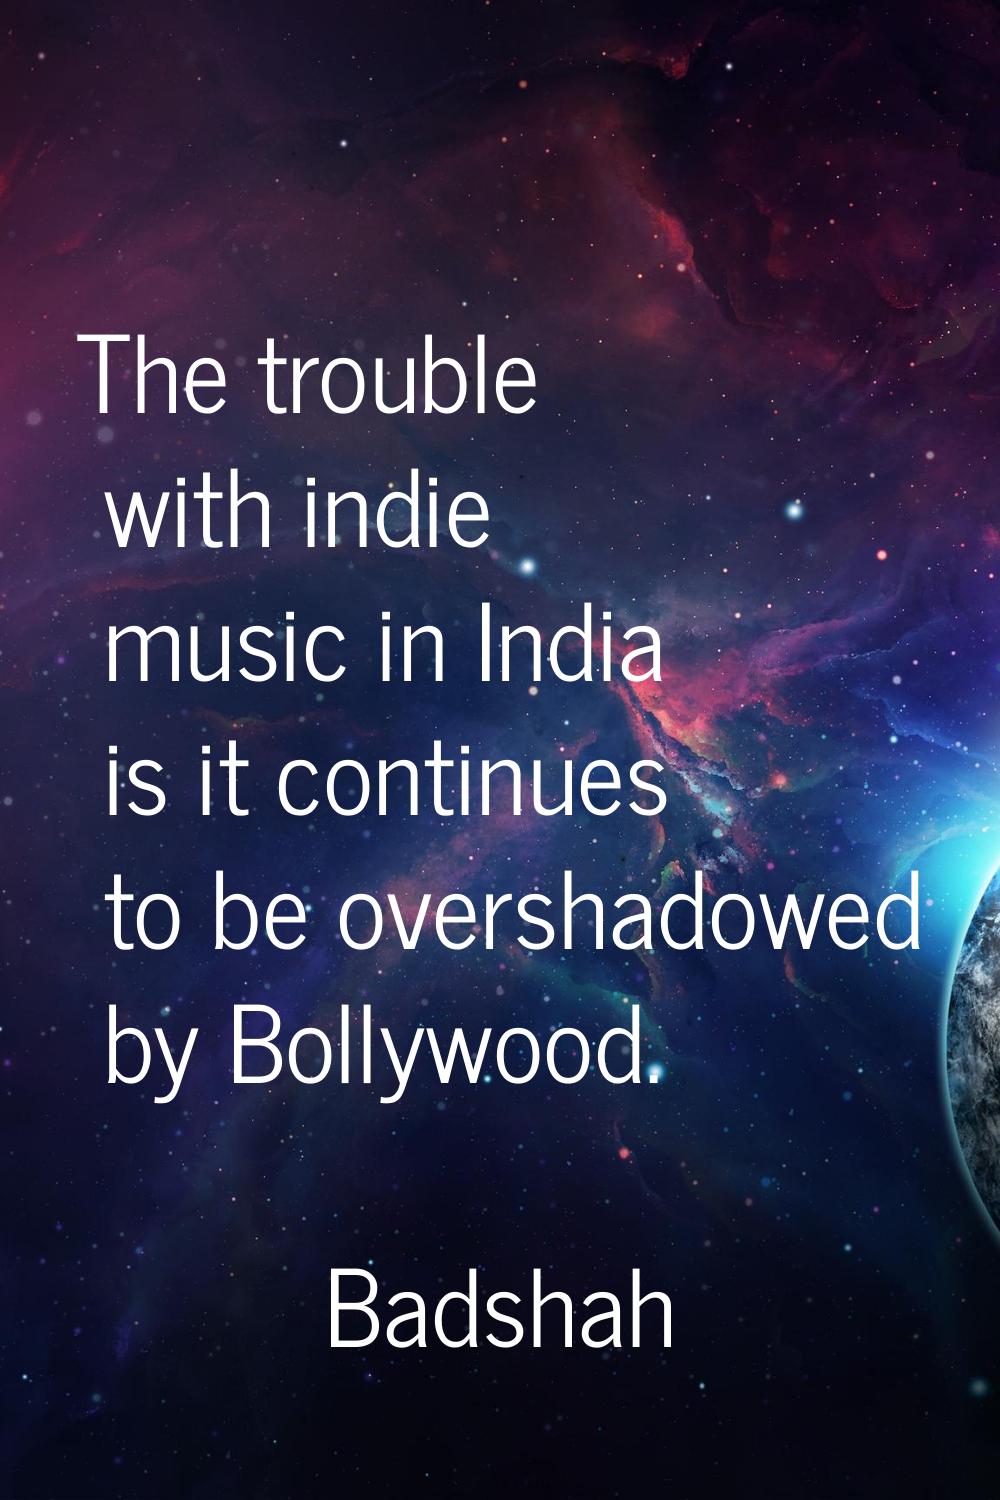 The trouble with indie music in India is it continues to be overshadowed by Bollywood.